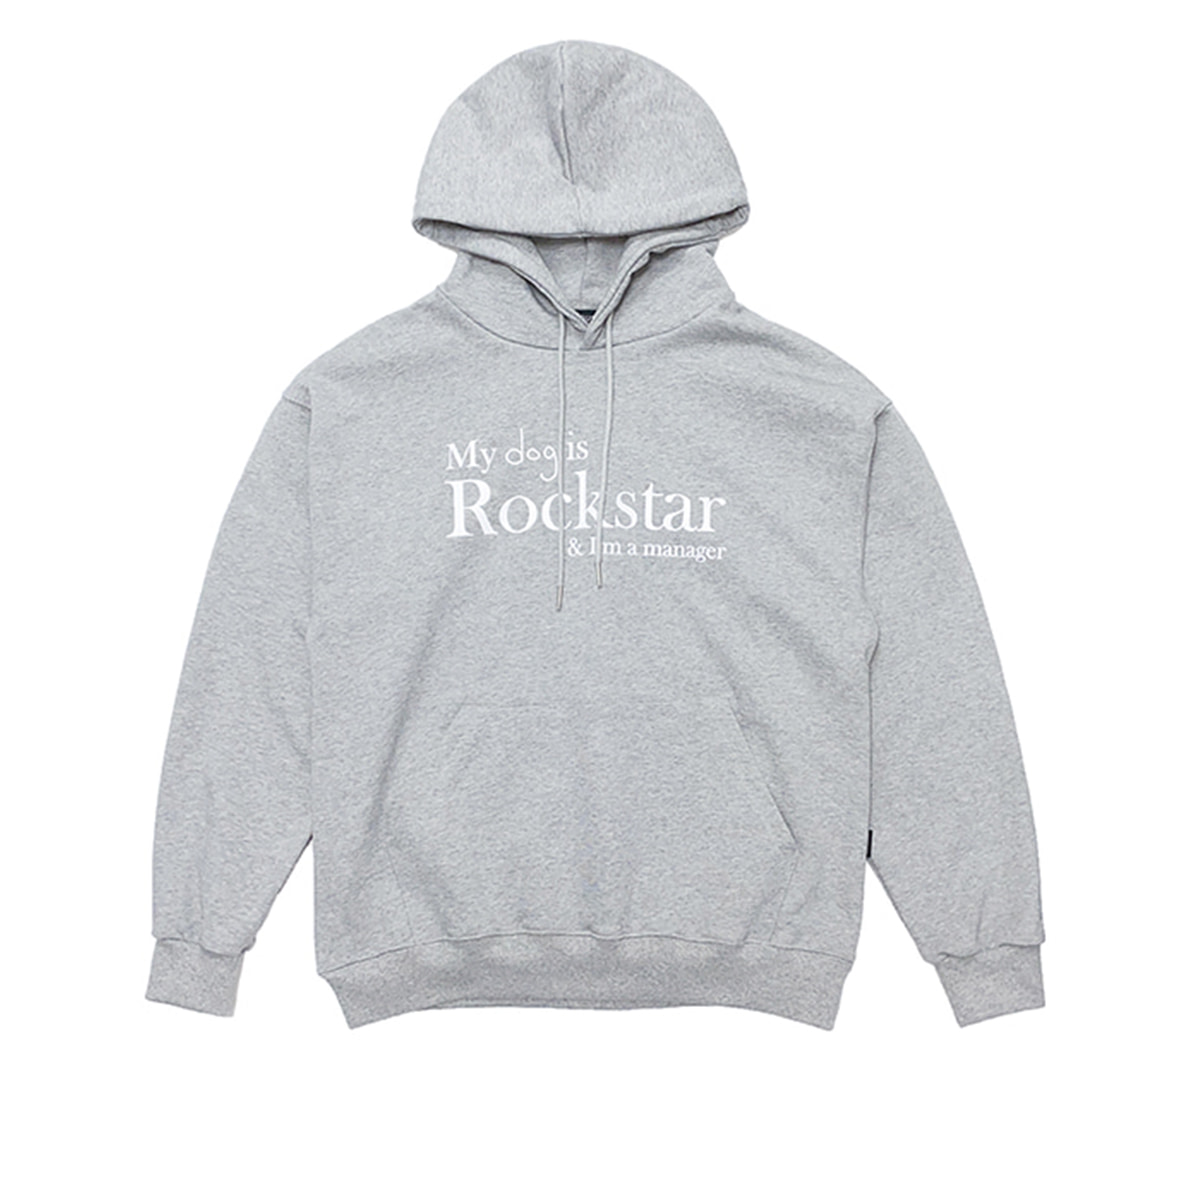 My dog is Rockstar &amp; I&#039;m a manager HOODIE ver. (Grey)